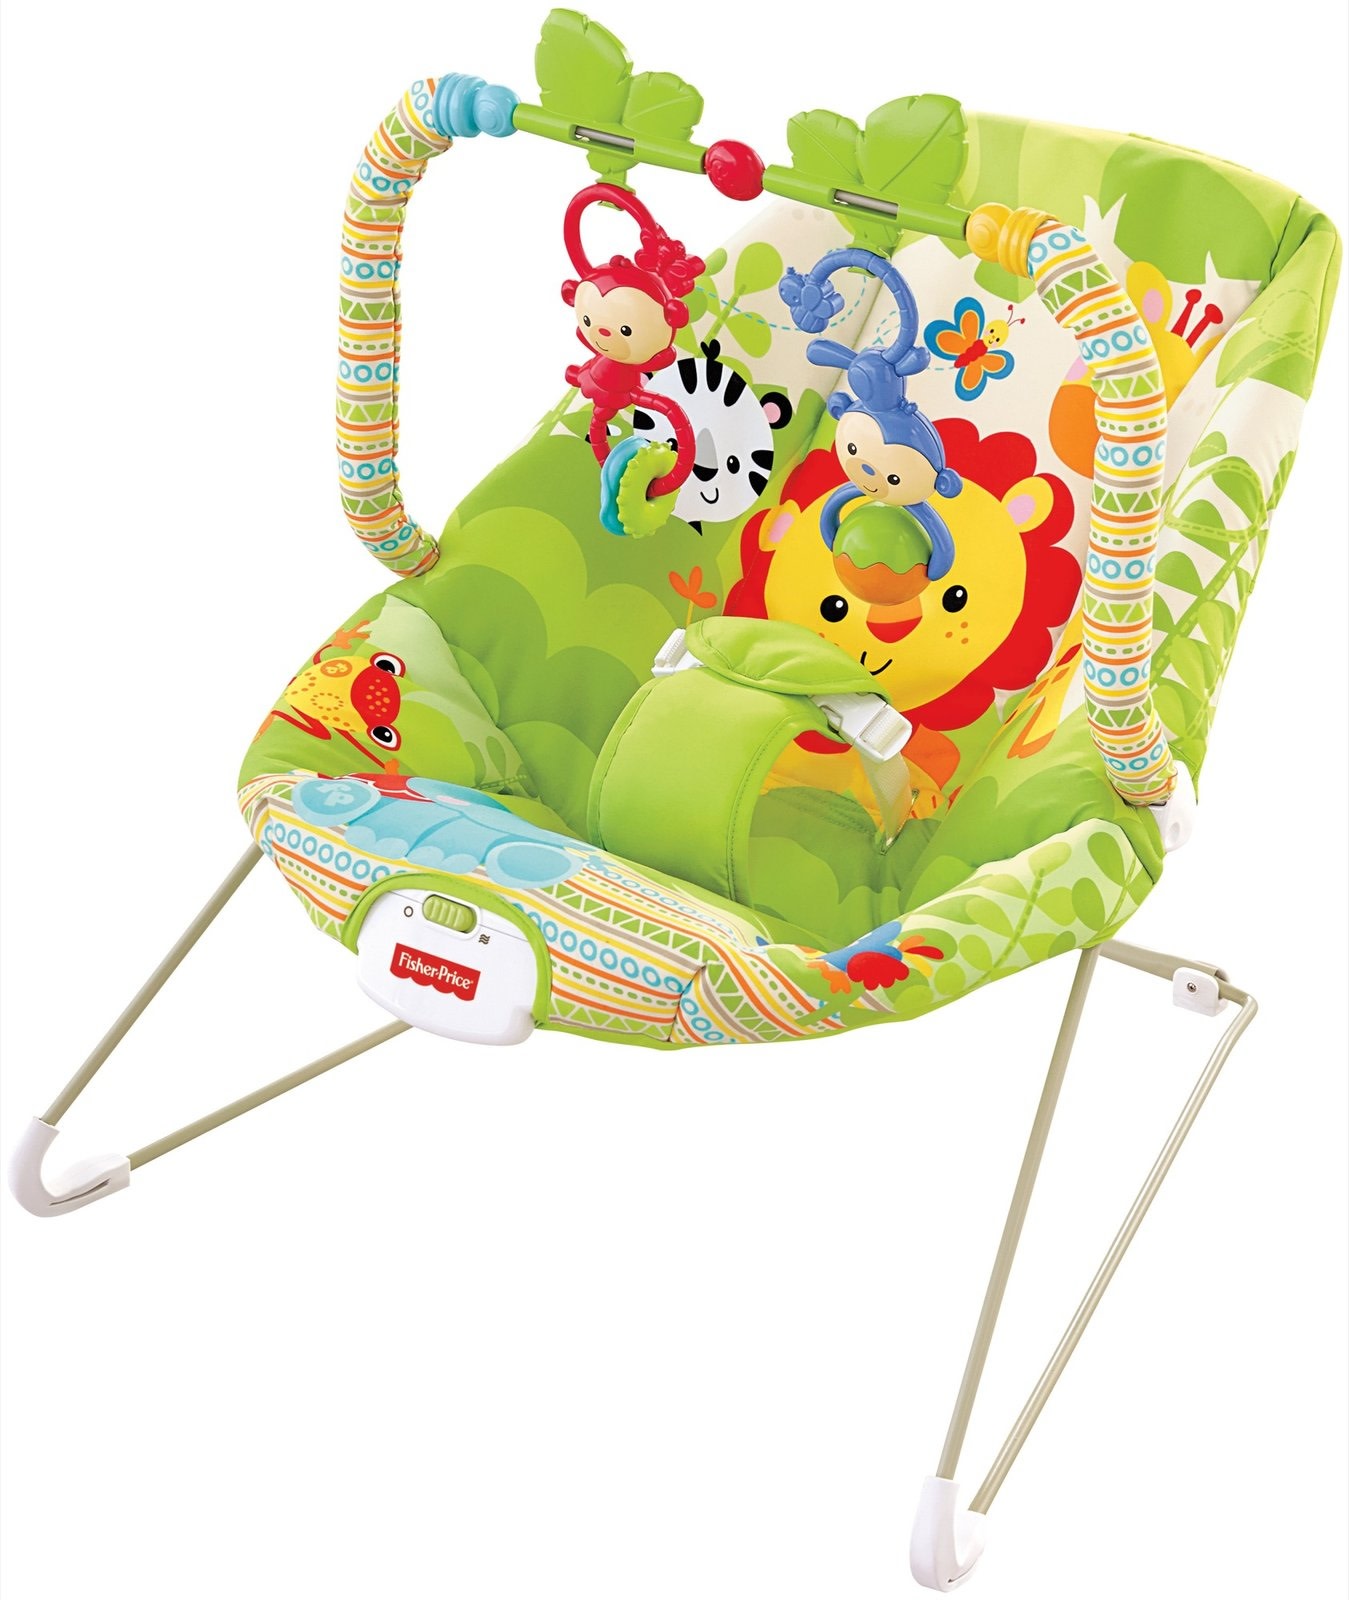 fisher price bouncer